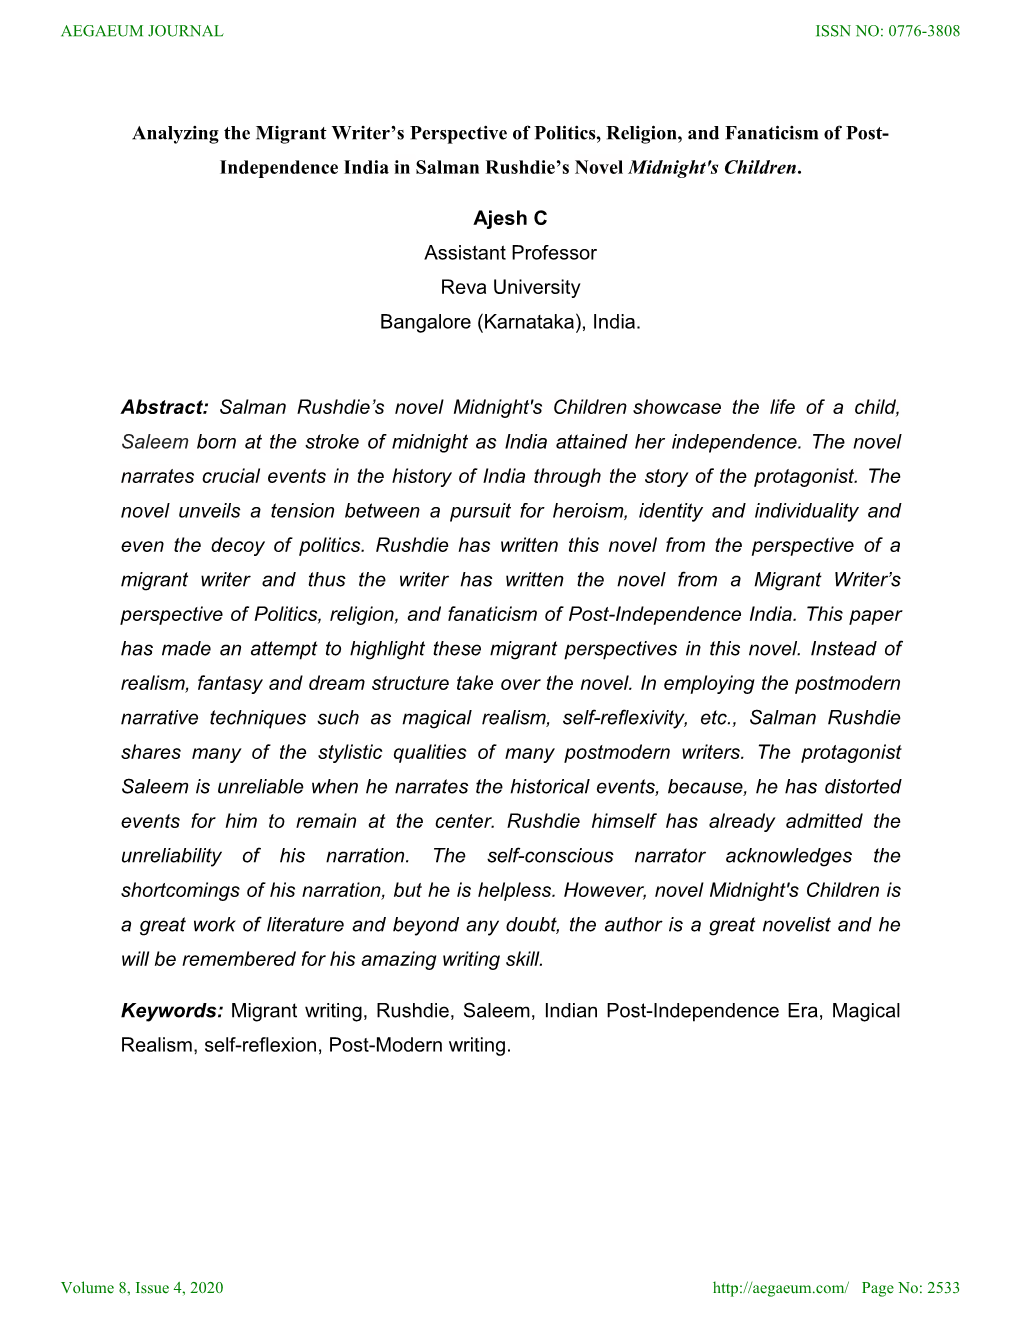 Analyzing the Migrant Writer's Perspective of Politics, Religion, and Fanaticism of Post